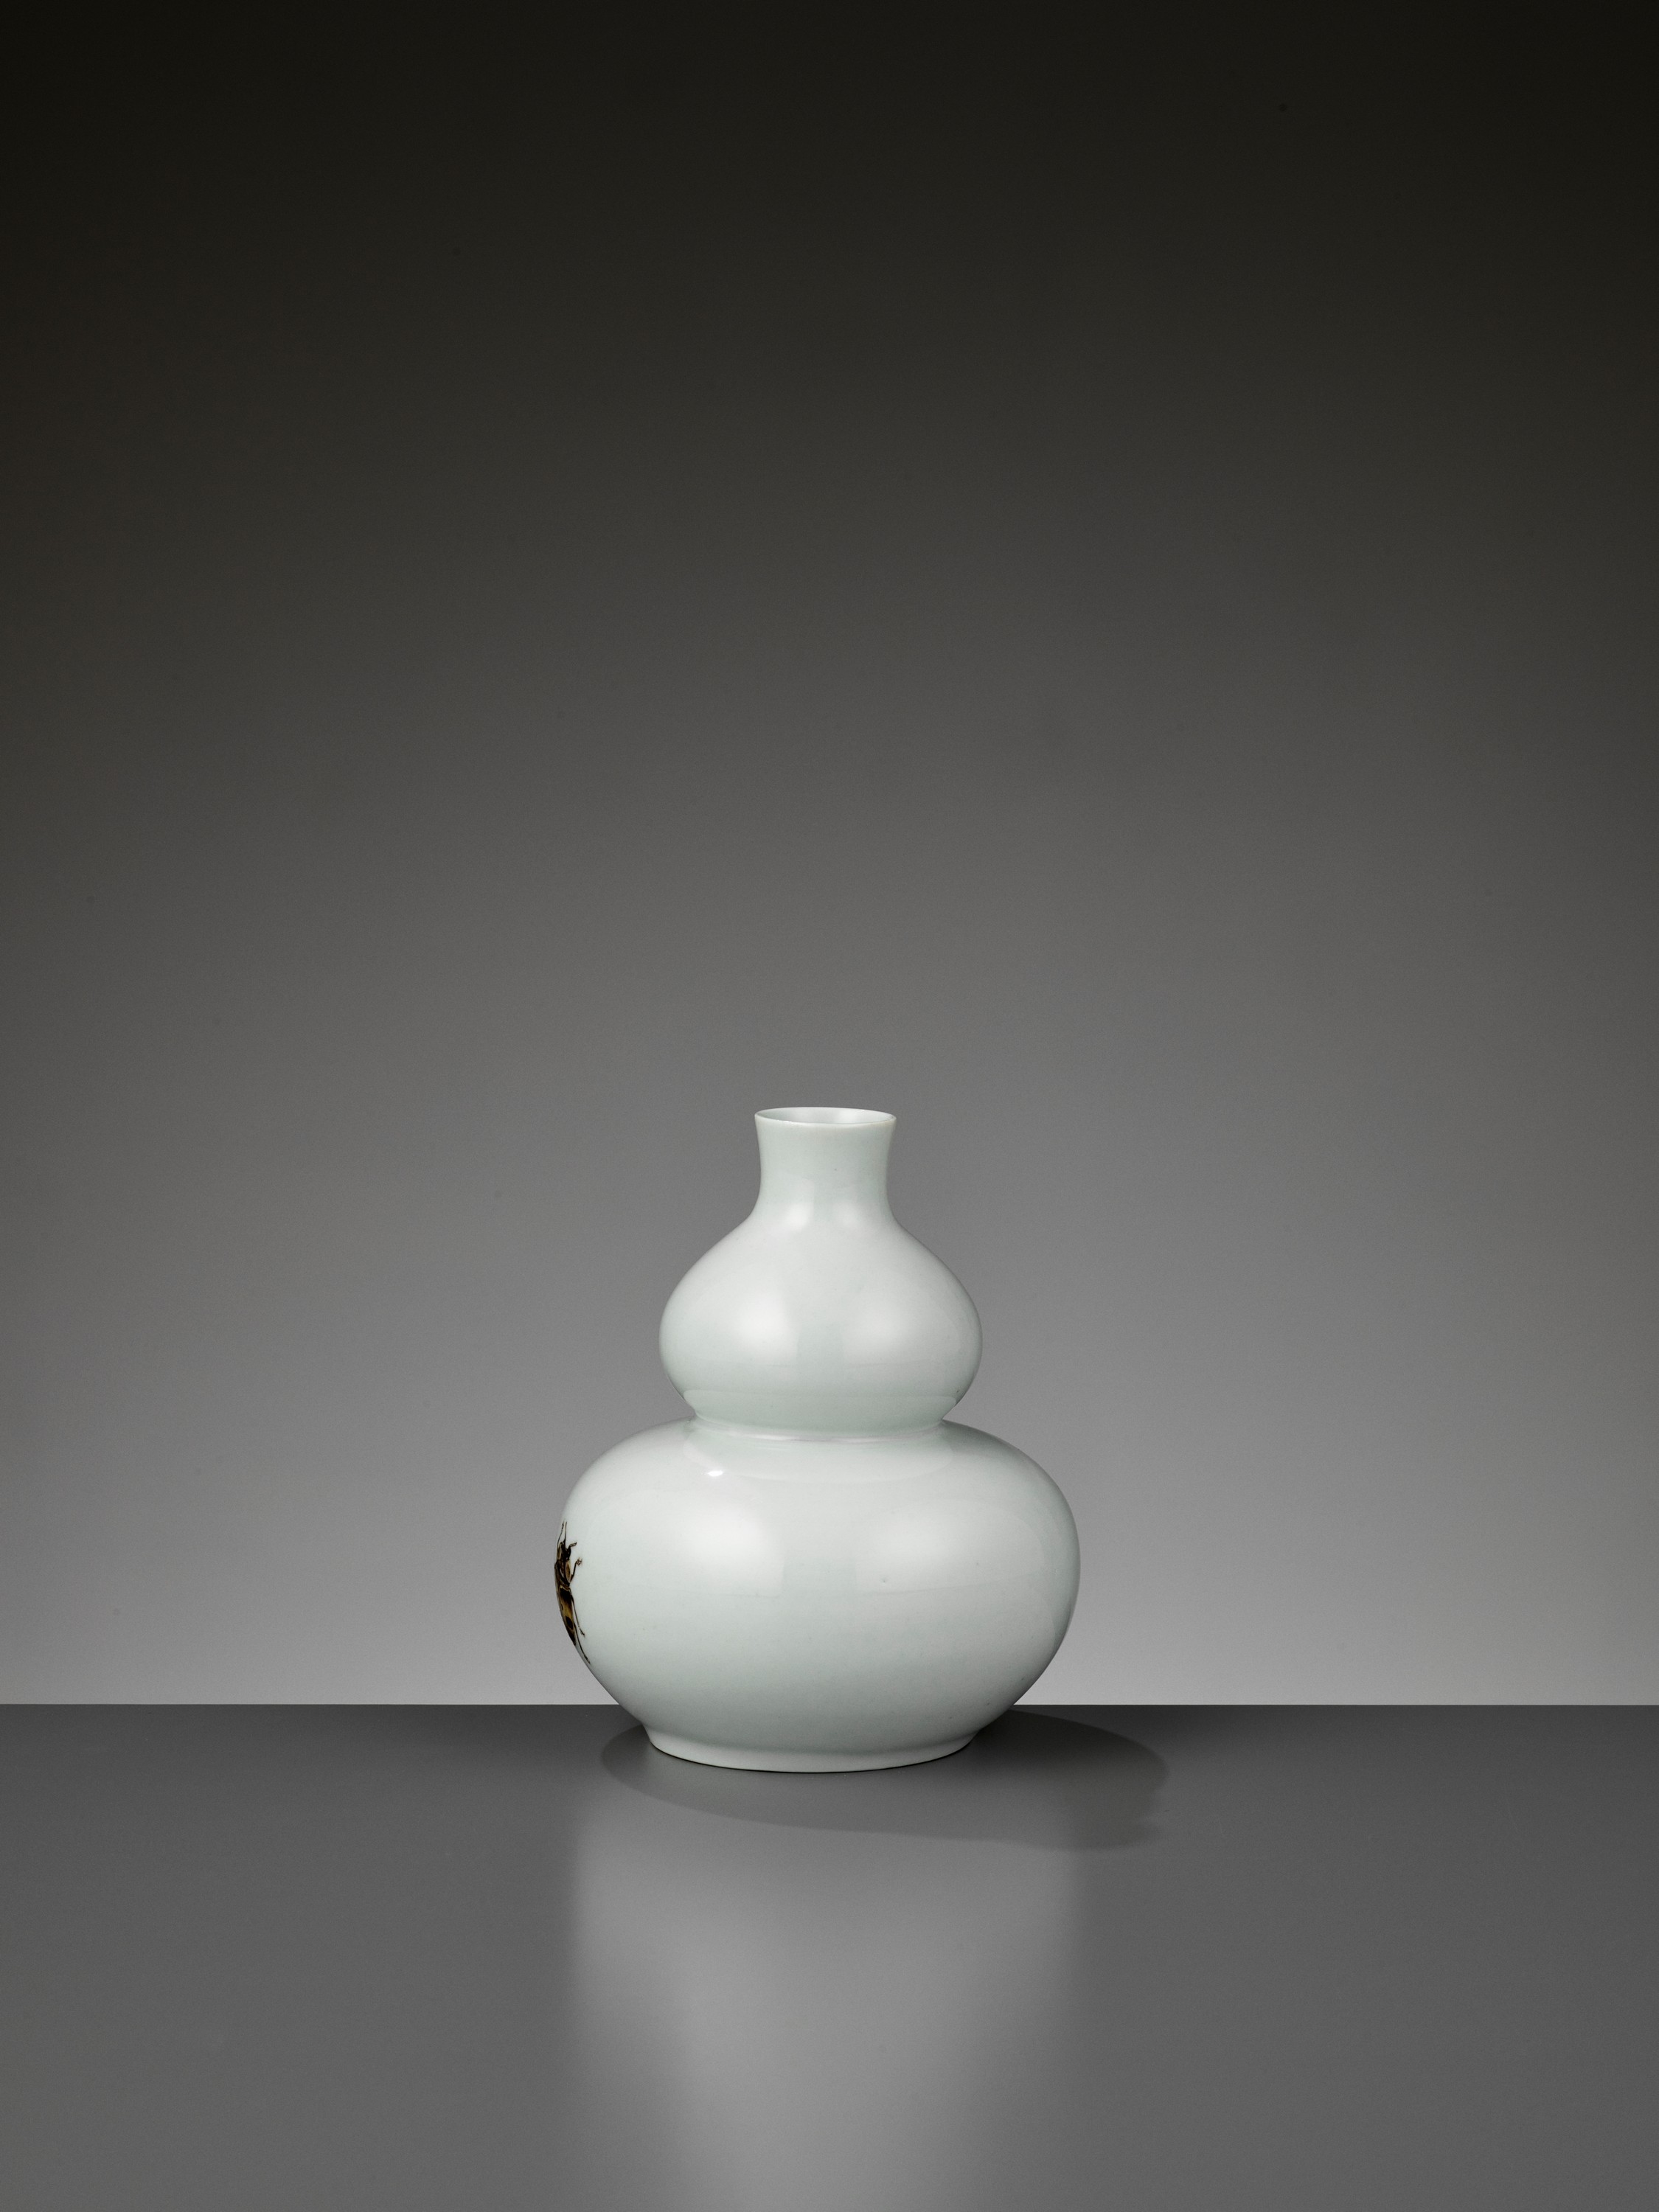 A 'TROMPE L'OEIL' PORCELAIN DOUBLE-GOURD VASE WITH A CICADA, BY MIDDLE KINGDOM PORCELAIN - Image 5 of 9